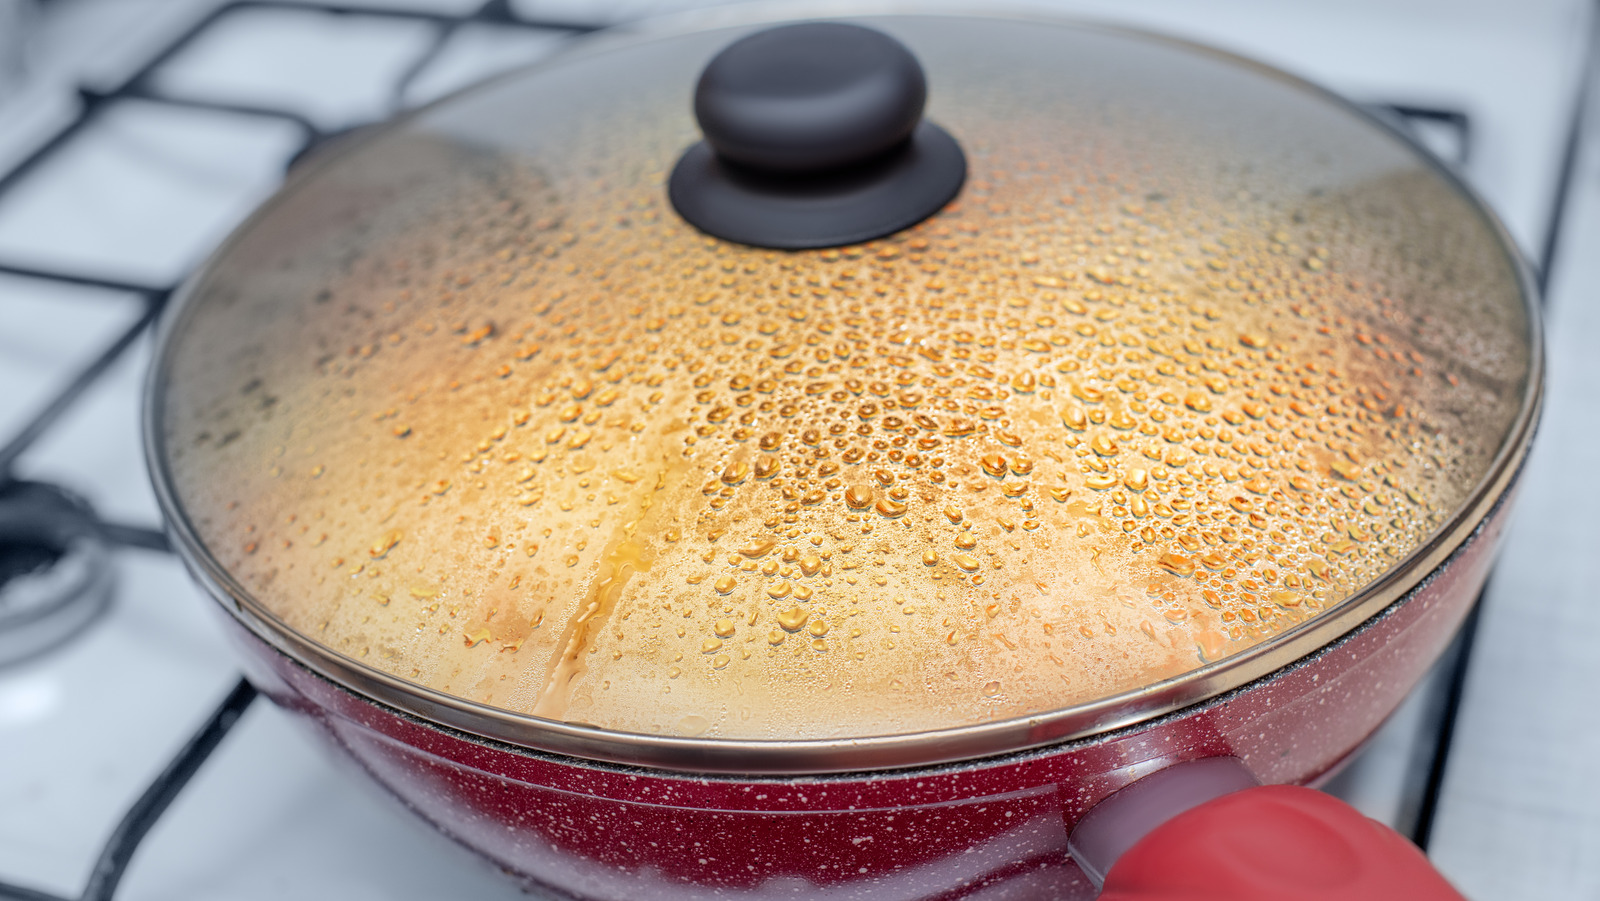 boiling - What's the best way to keep cover of a pan slightly